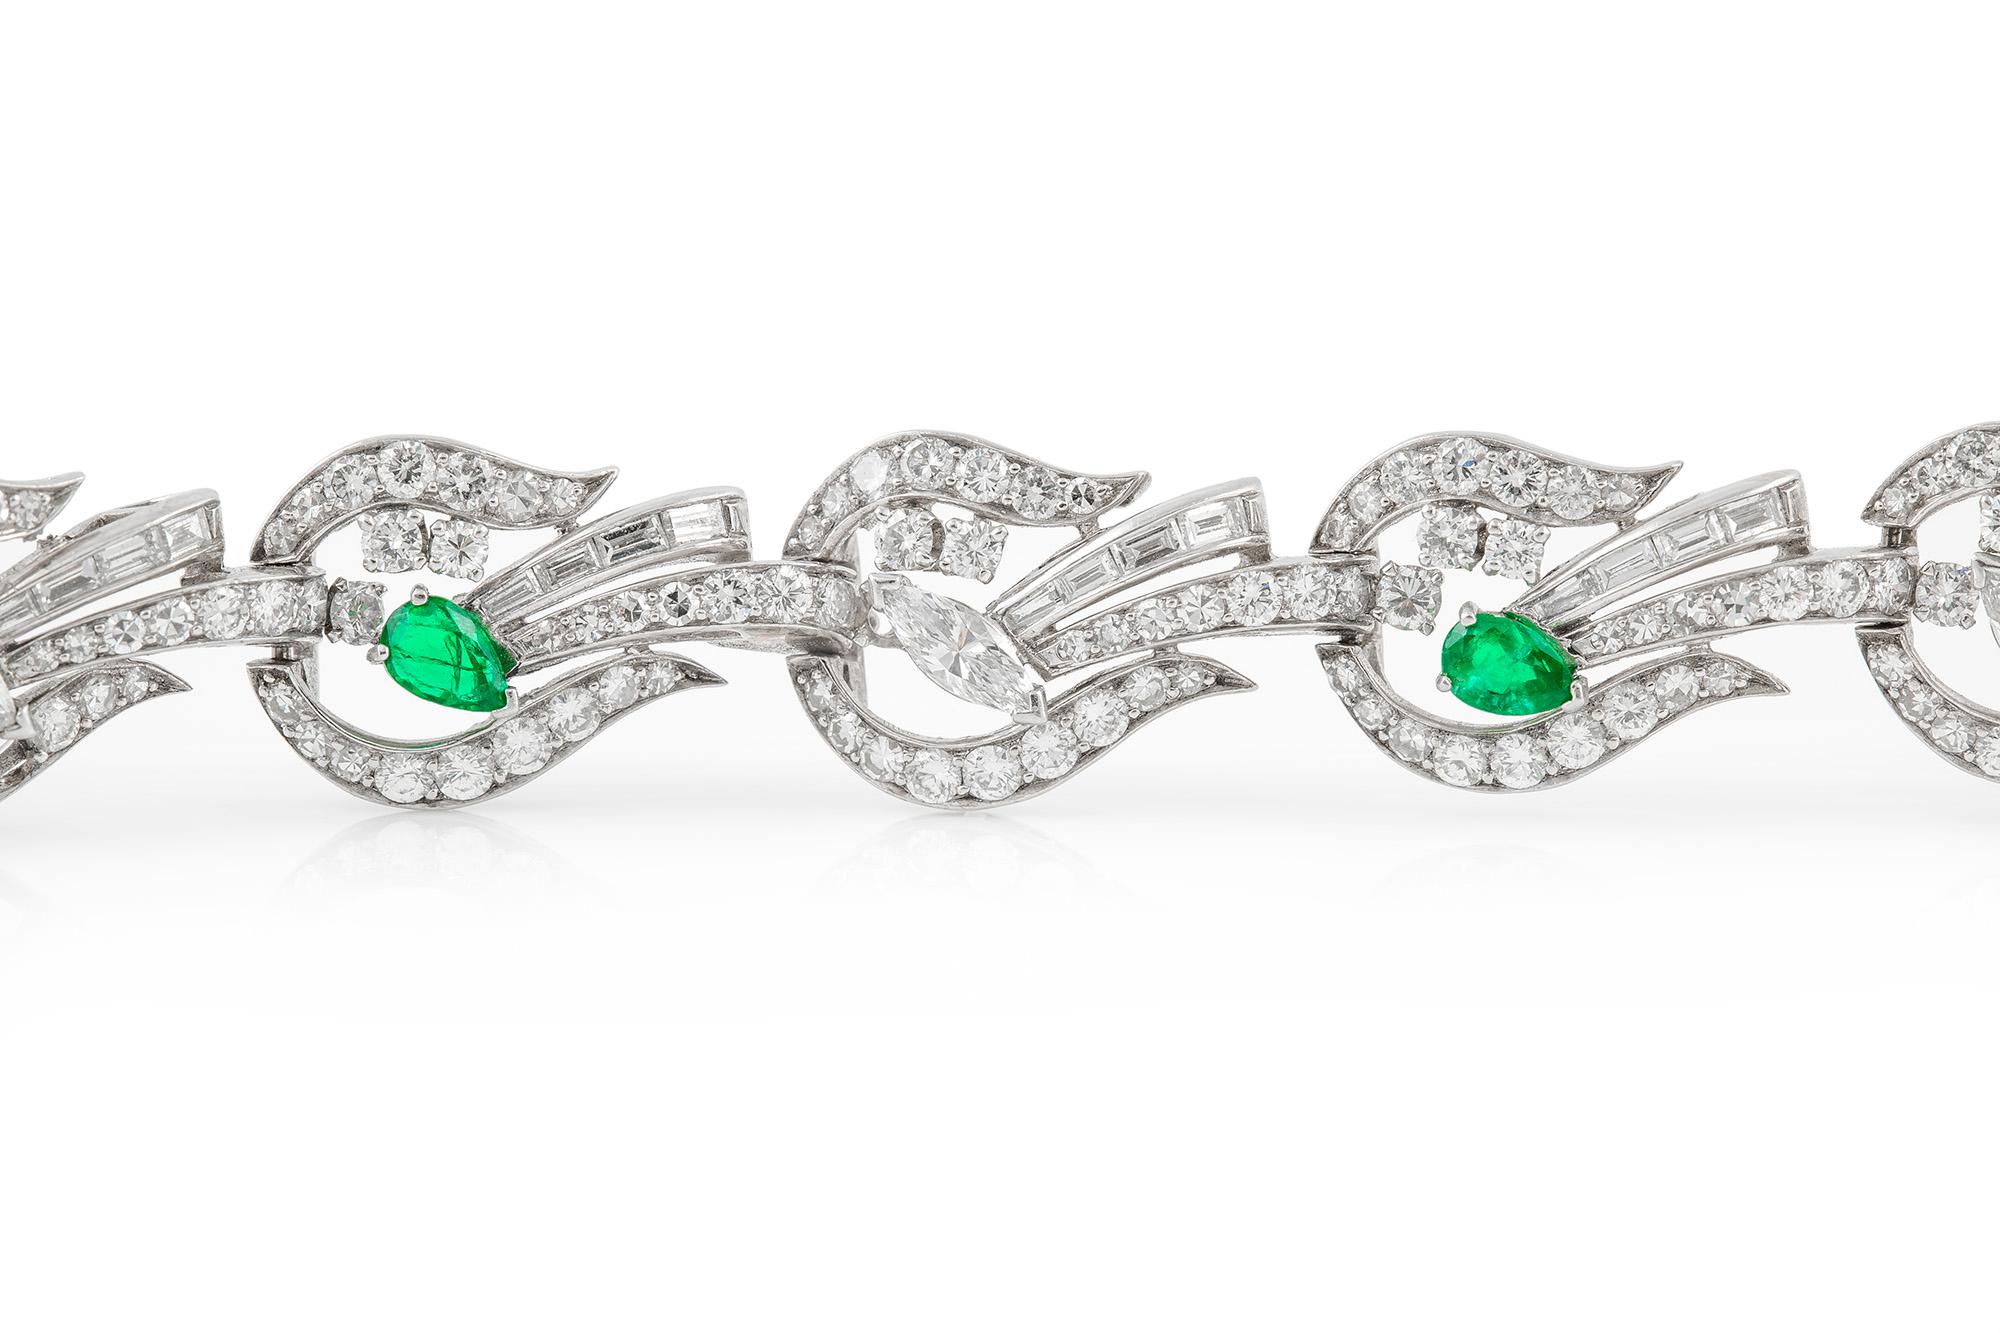 Platinum Diamond Emerald Bracelet In Good Condition For Sale In New York, NY